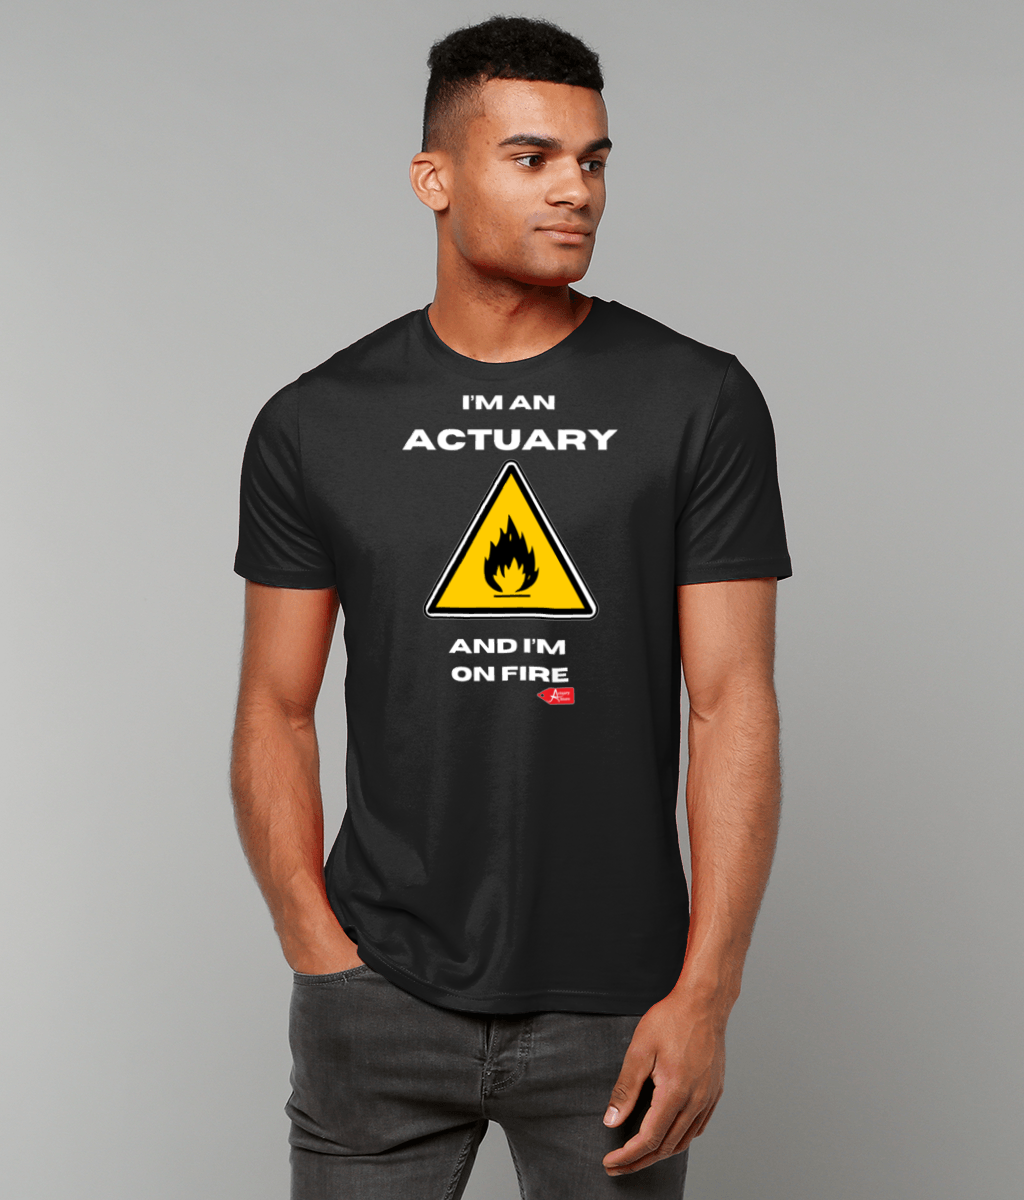 I'm An Actuary And I'm on Fire T-Shirt